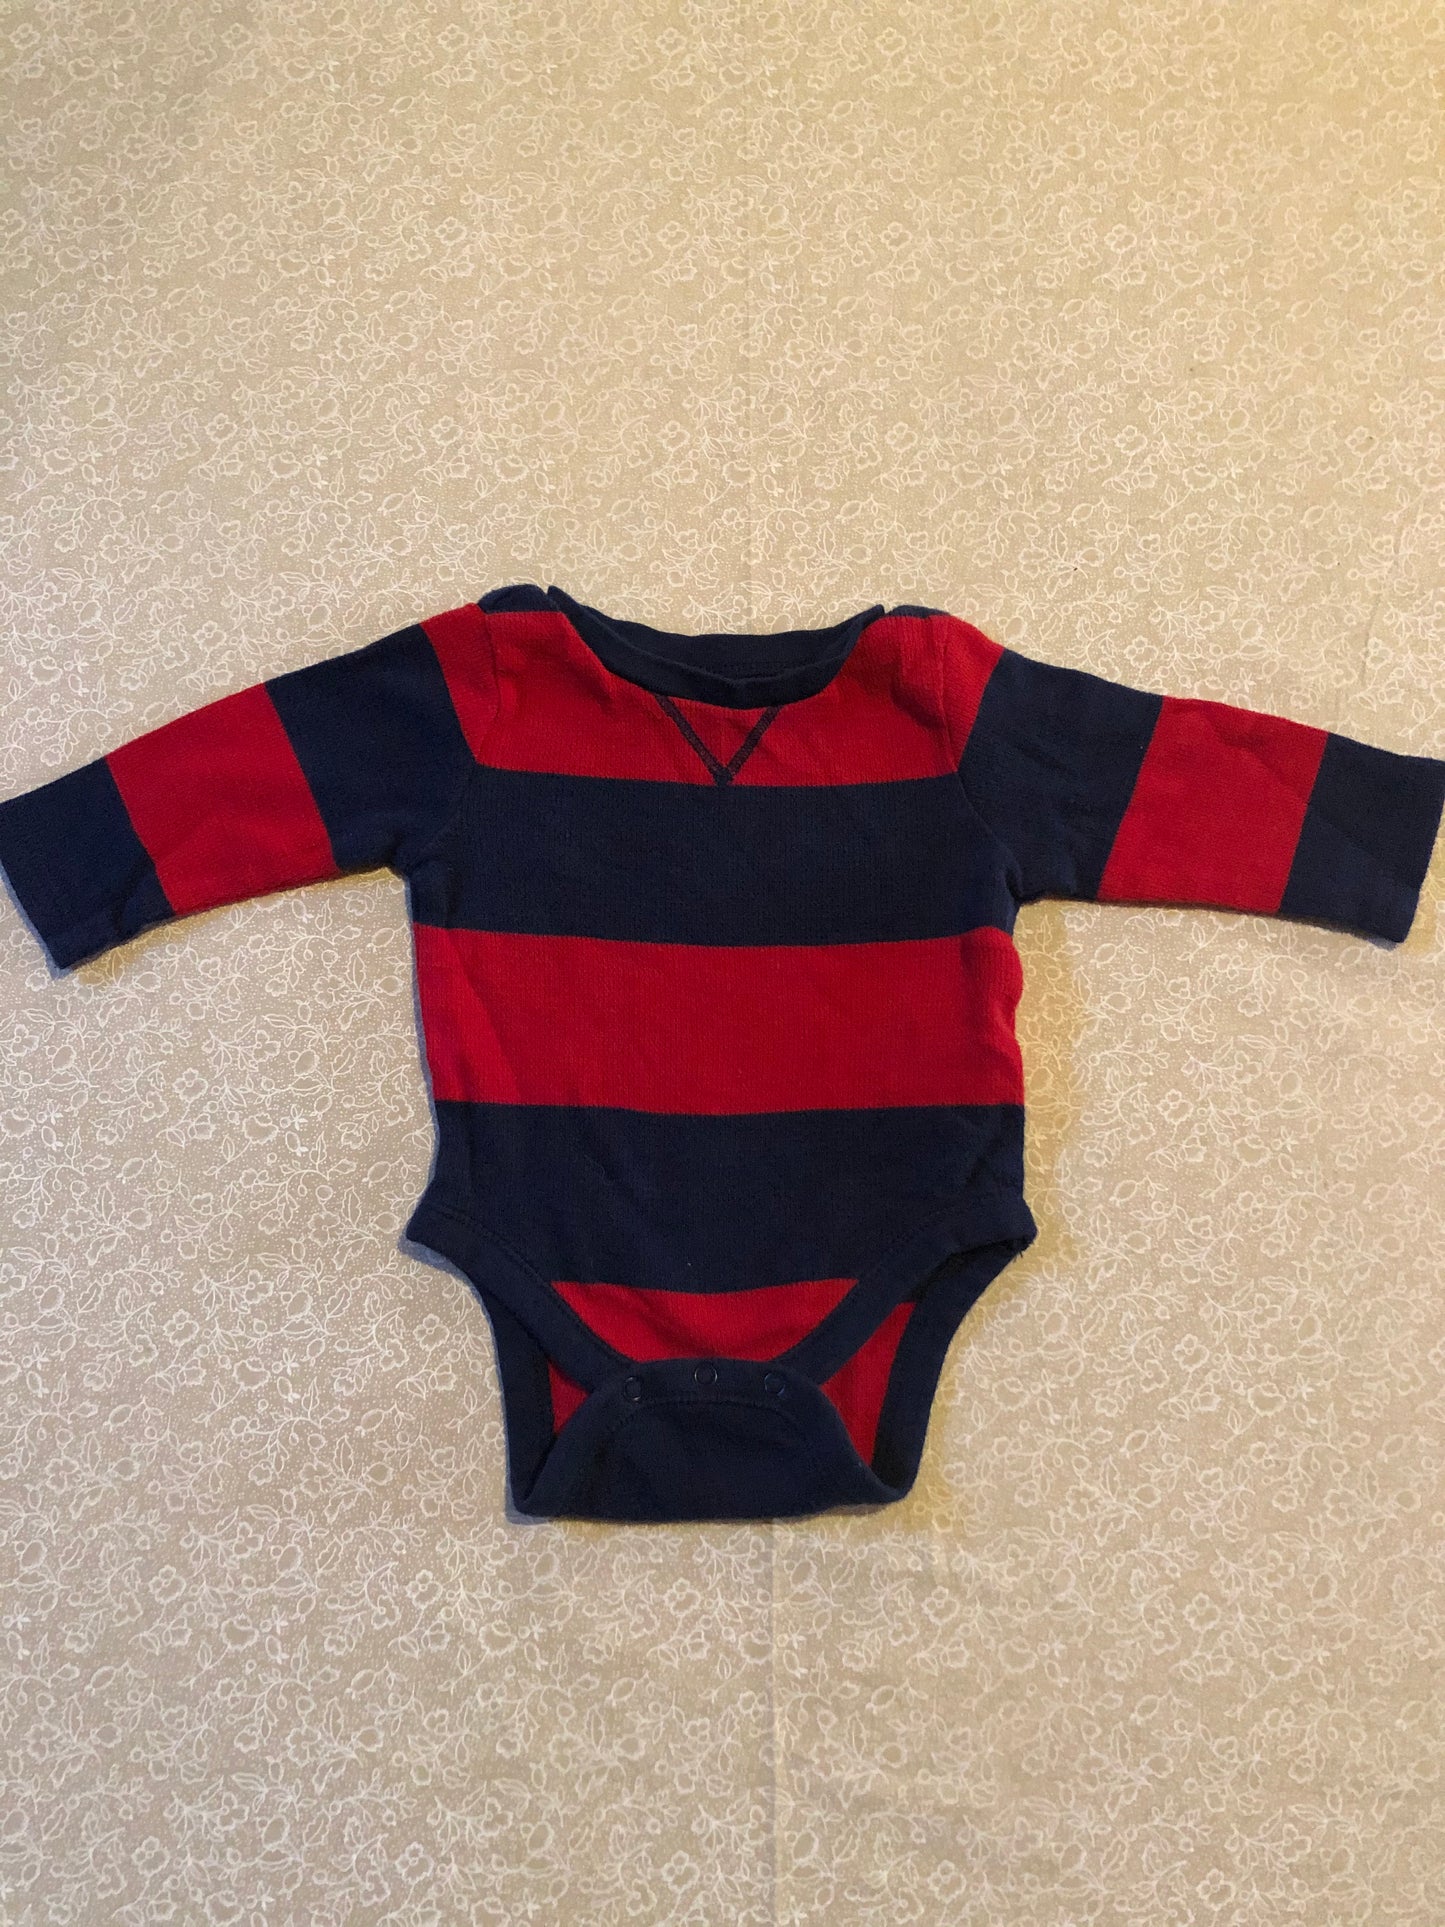 0-3-month-long-sleeve-diaper-shirt-old-navy-blue-red-stripes